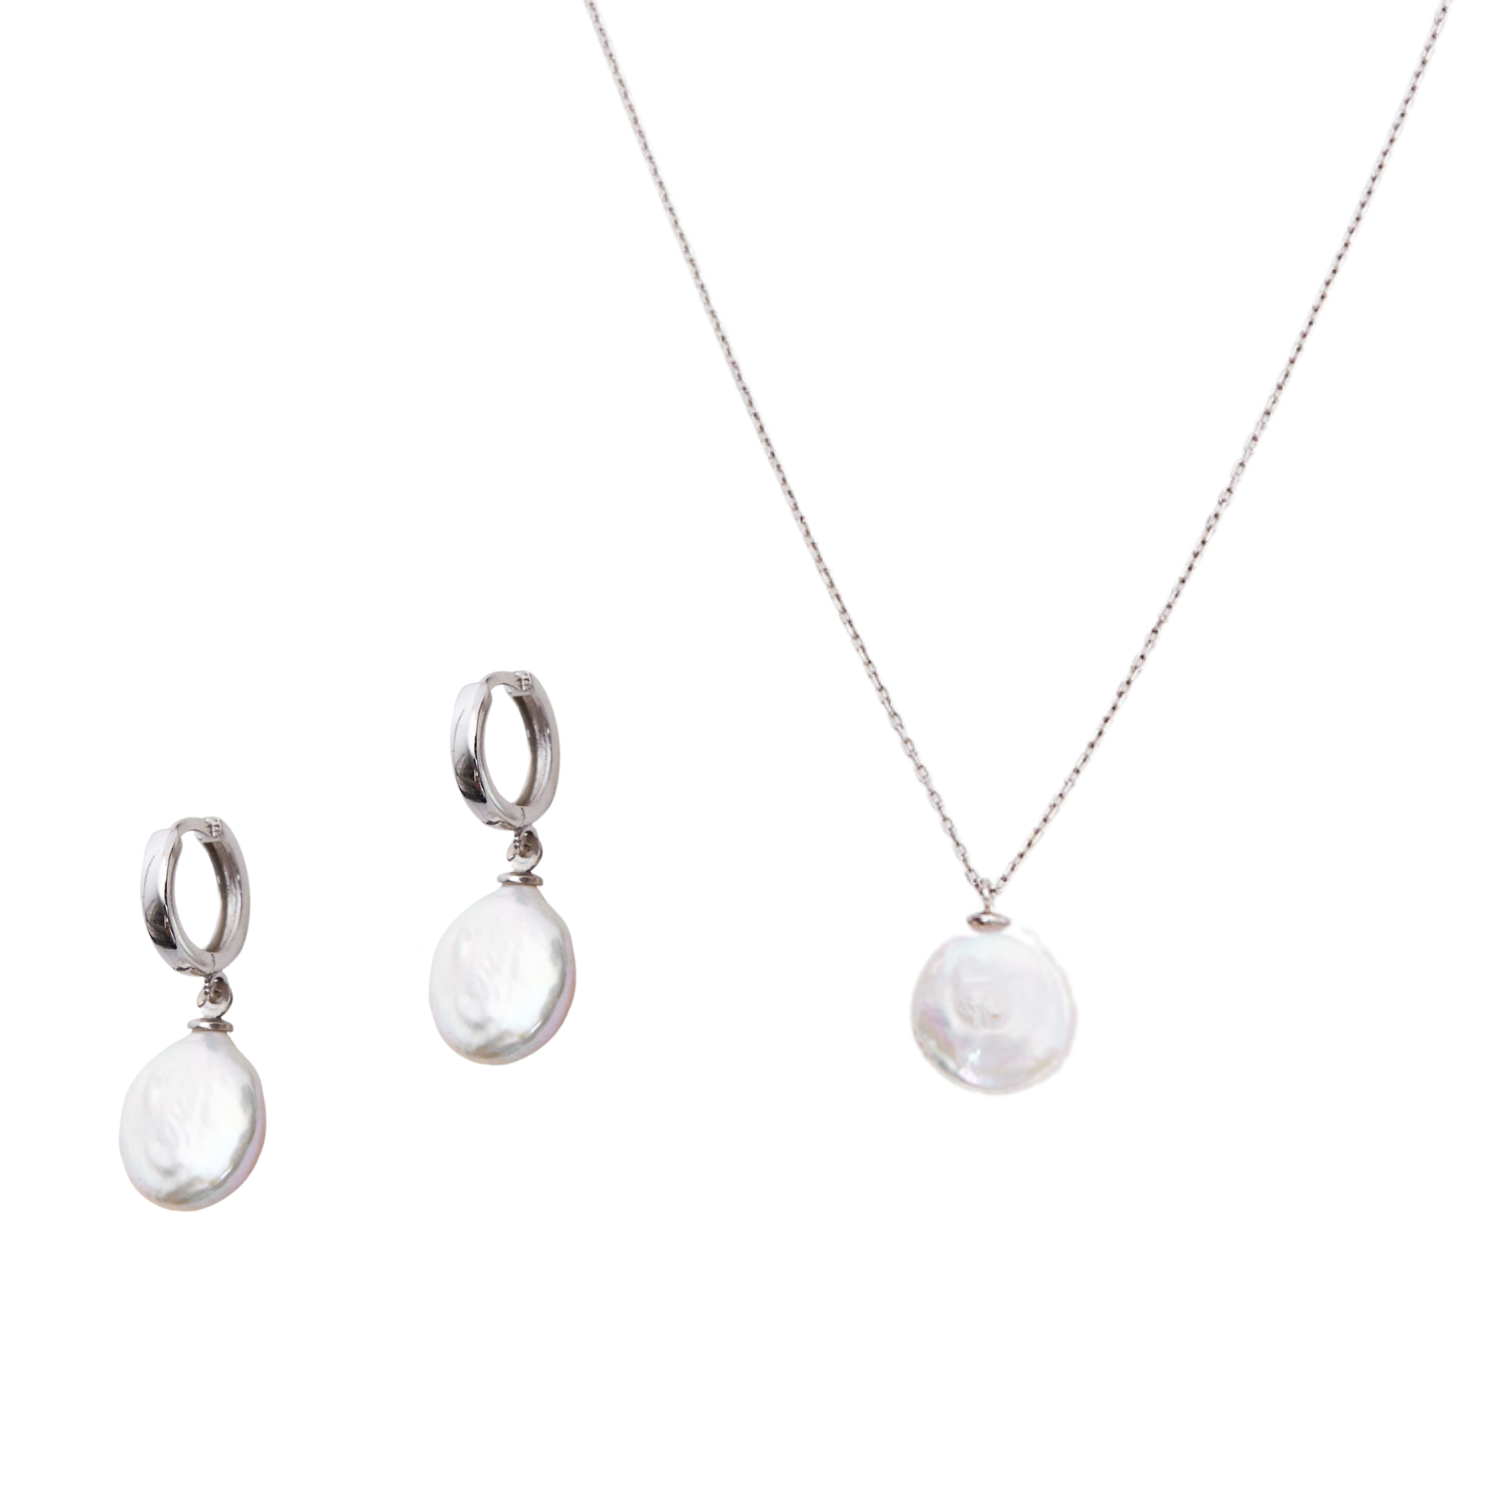 Baroque Flat Pearl Pendant Necklace and Earring Sterling Silver Set